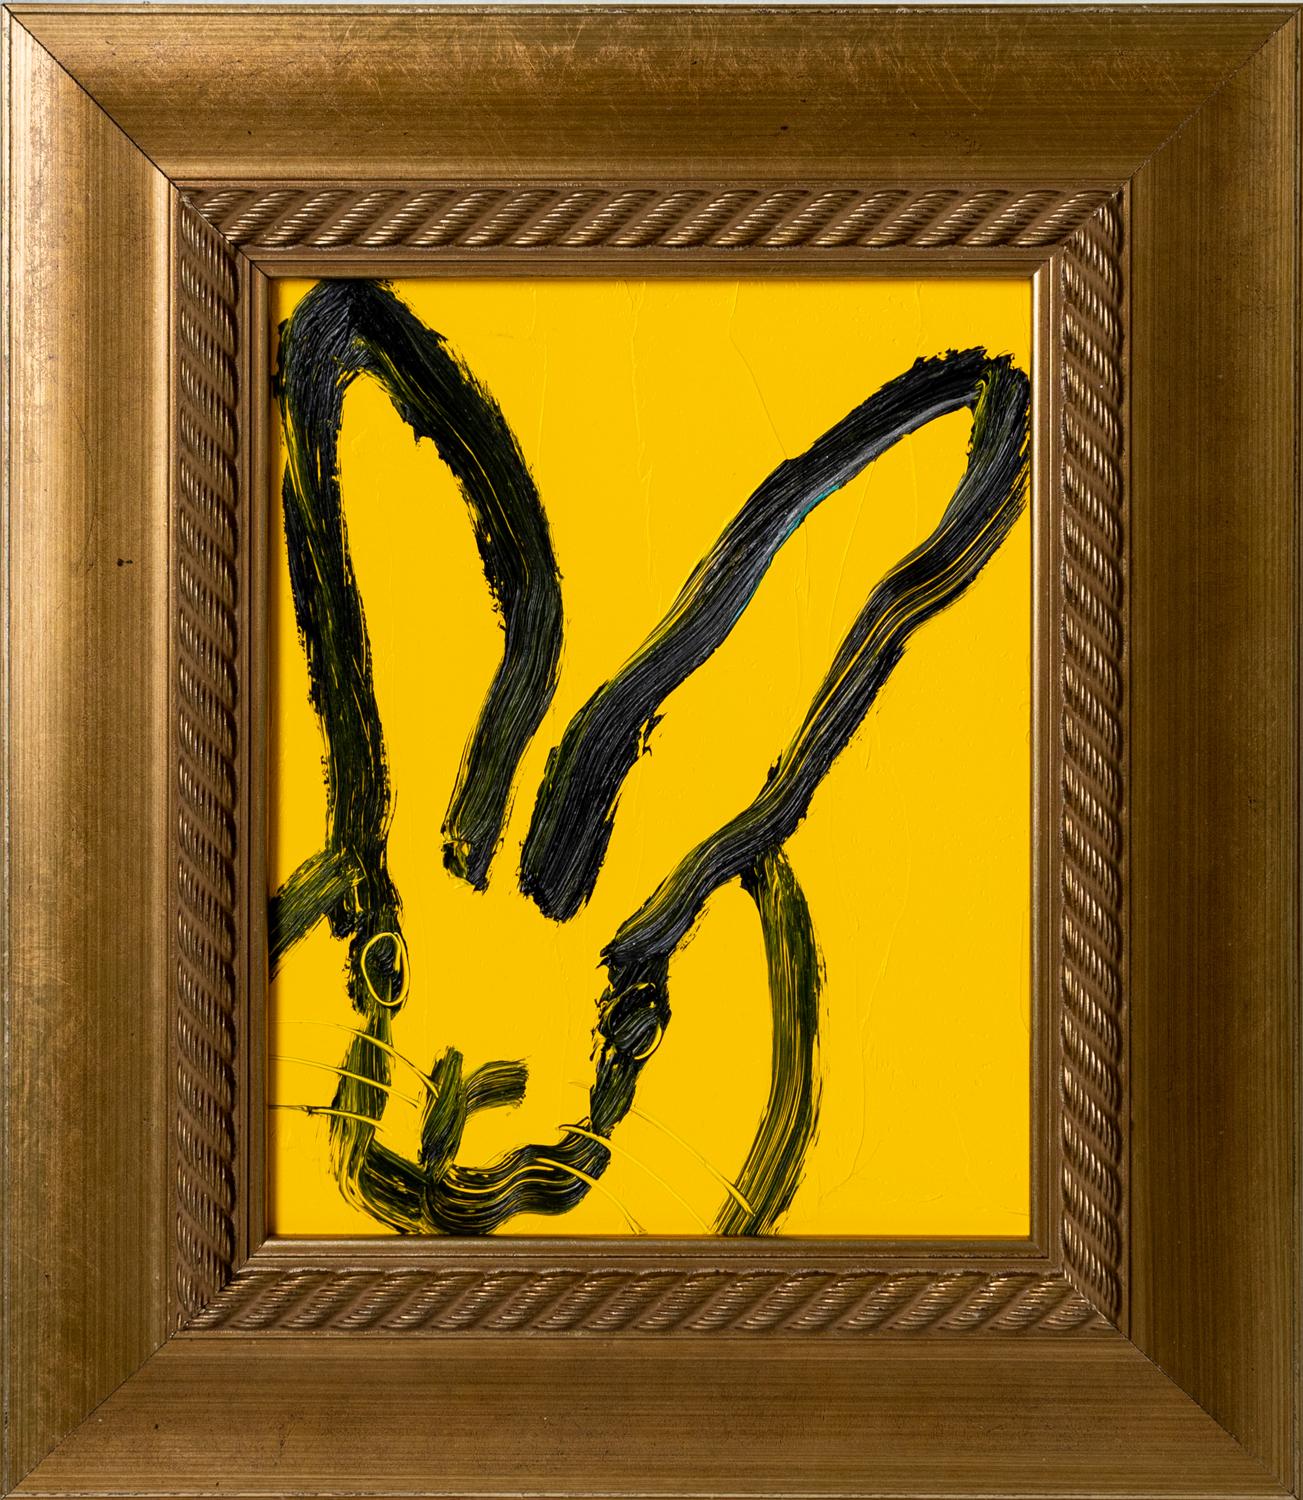 Hunt Slonem Figurative Painting - Hundreds "Bunny Painting" Yellow Original Oil Painting in Vintage Gold Frame